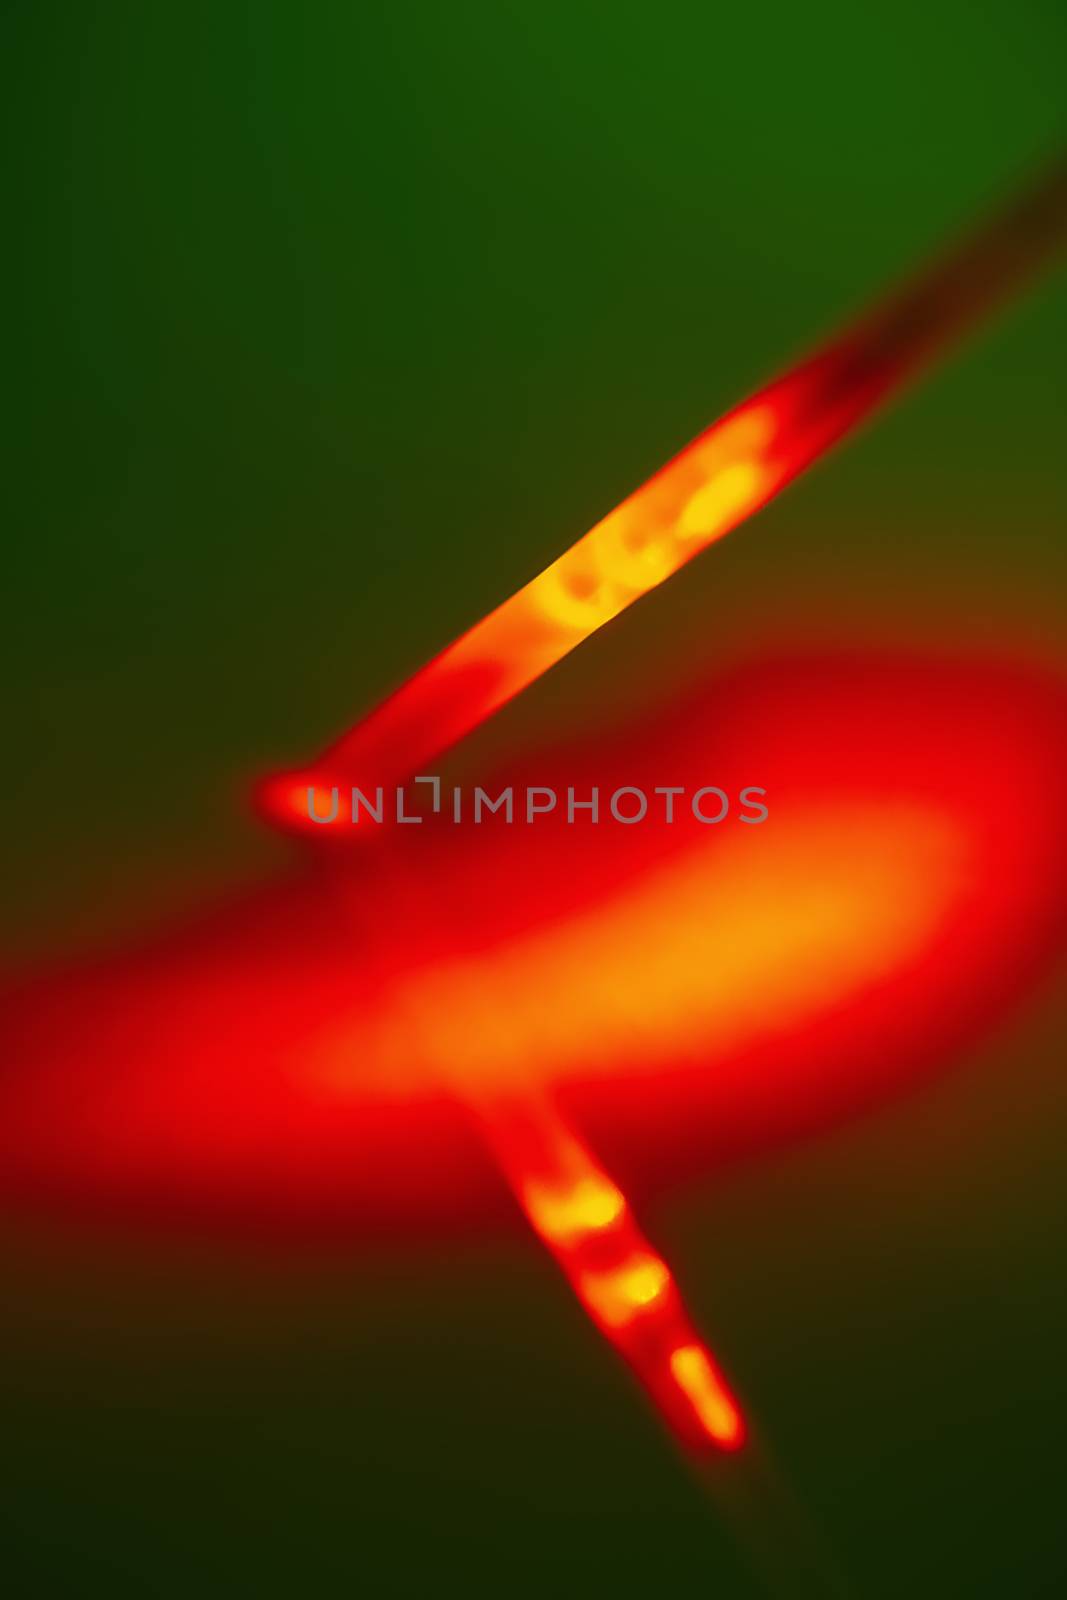 Red bright light source on the end of the probe in a plastic tube on a green background